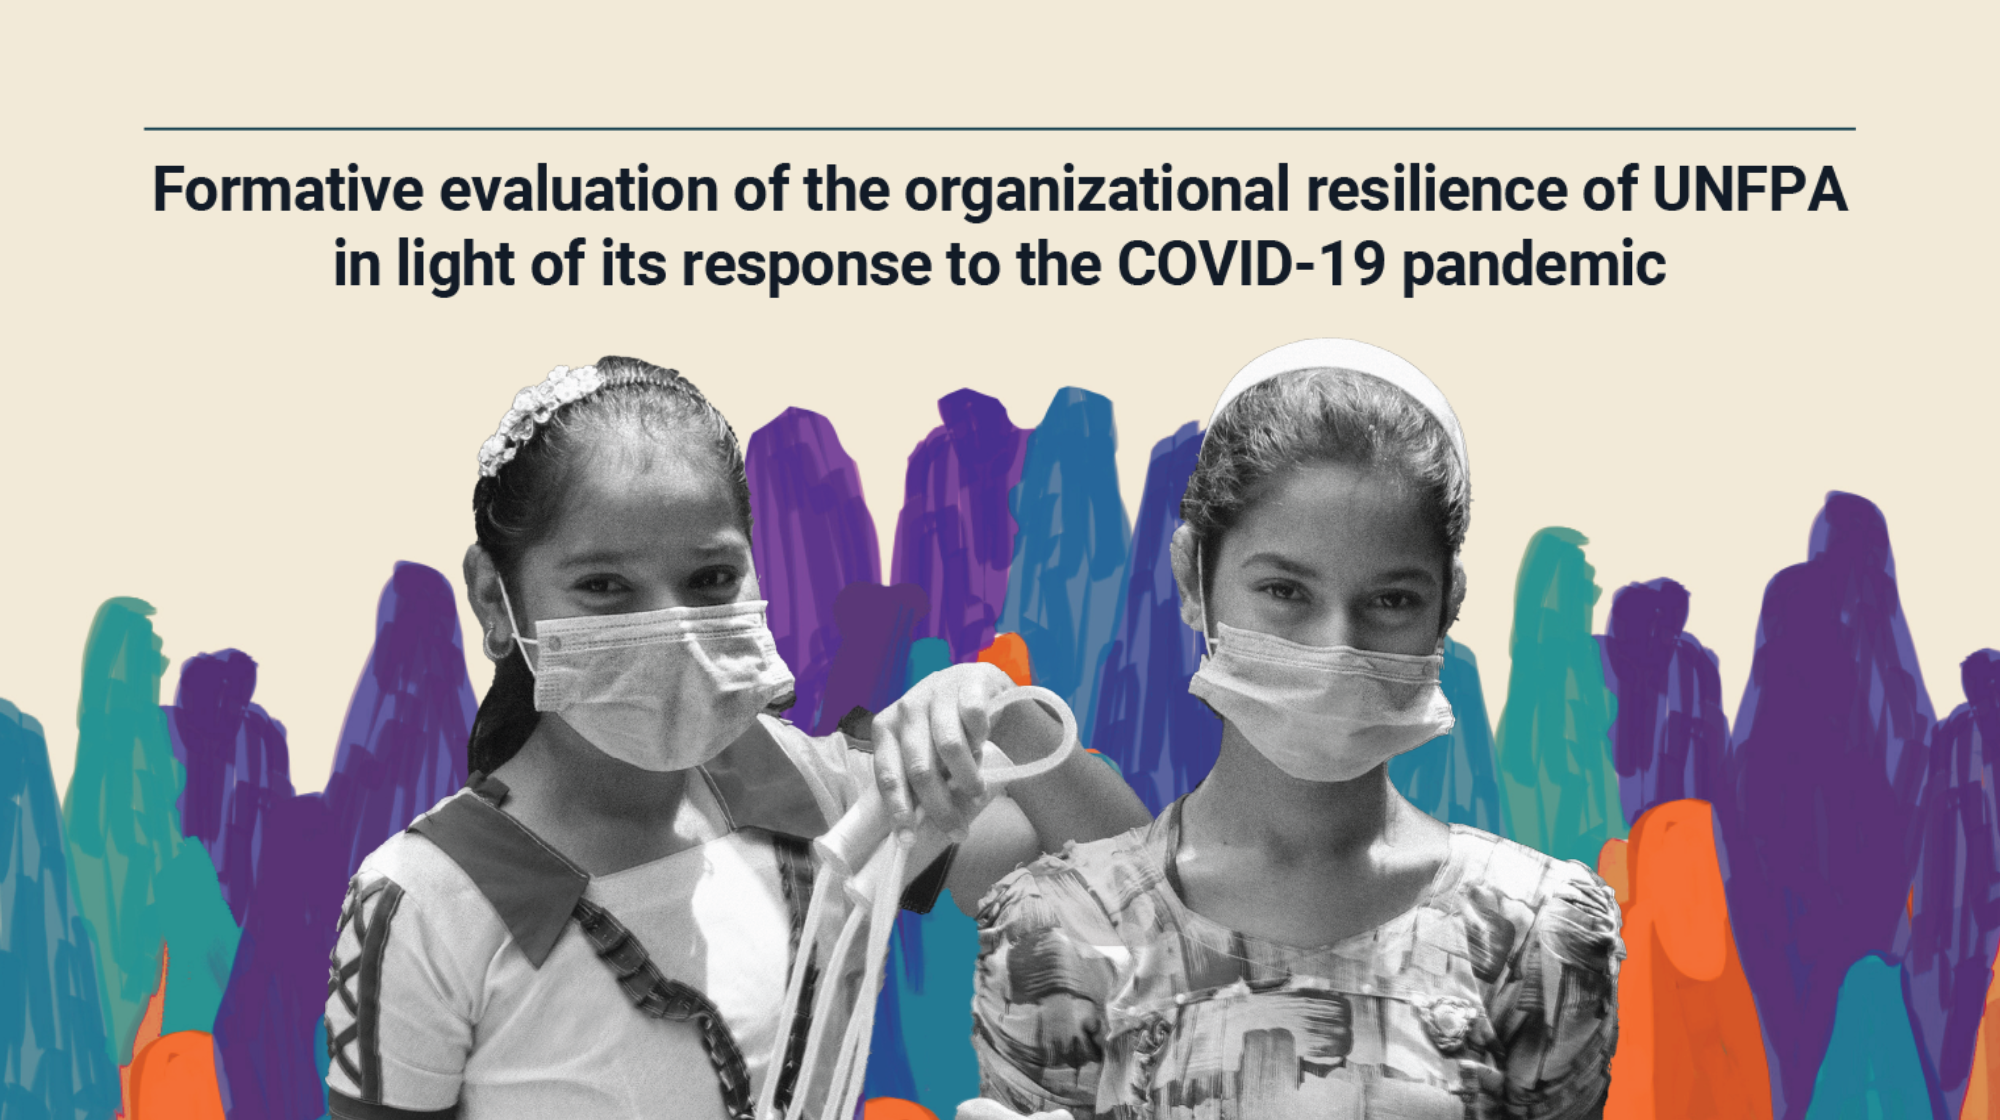 Formative evaluation of the organizational resilience of UNFPA in light of its response to the COVID-19 pandemic